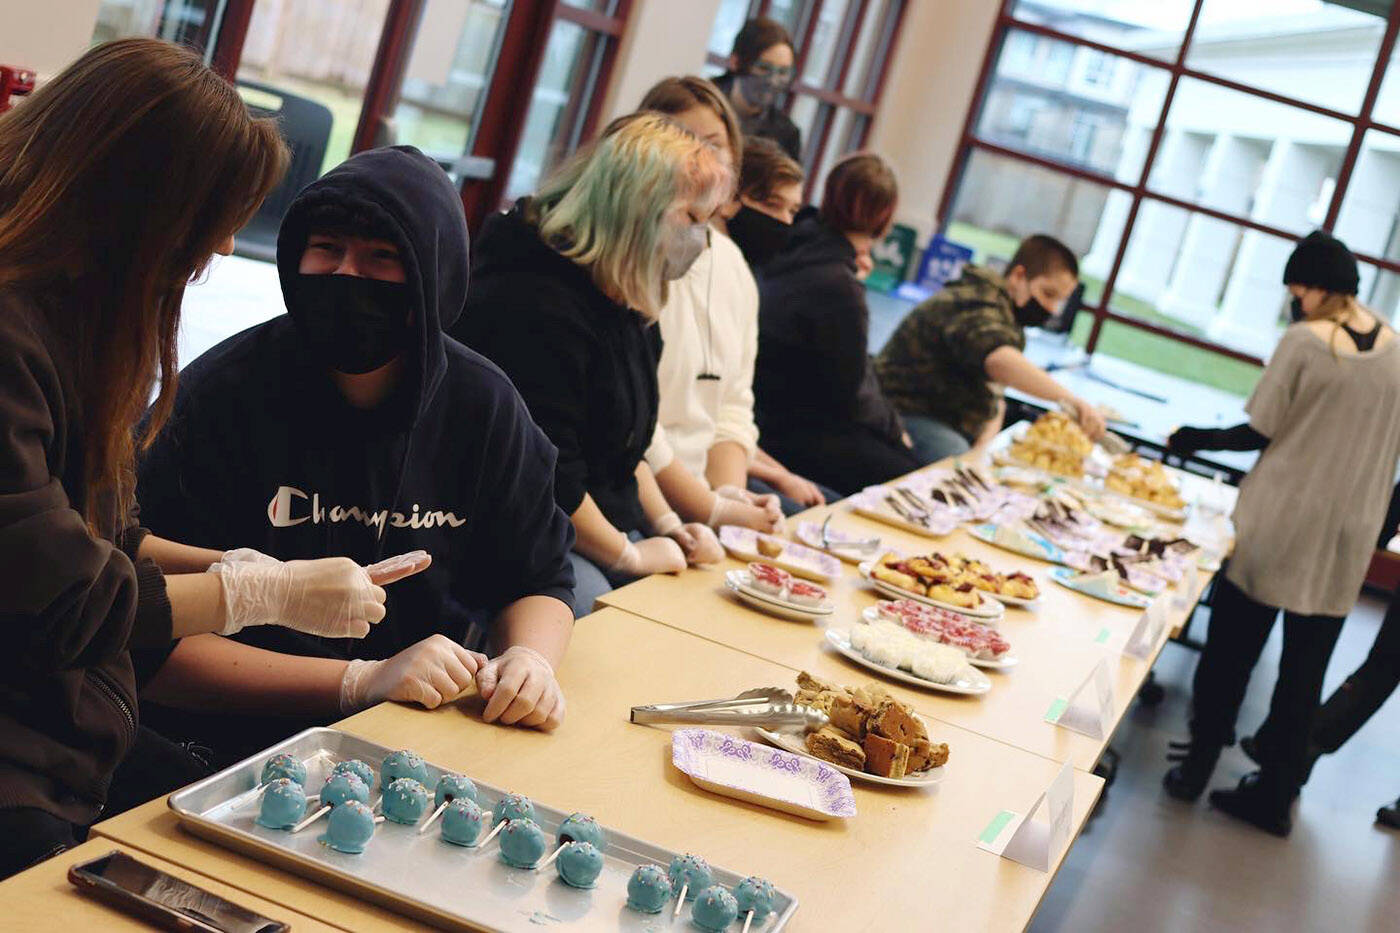 Imagine High students take part in a bake sale during the final day of their Deep Dives project. (Submitted)